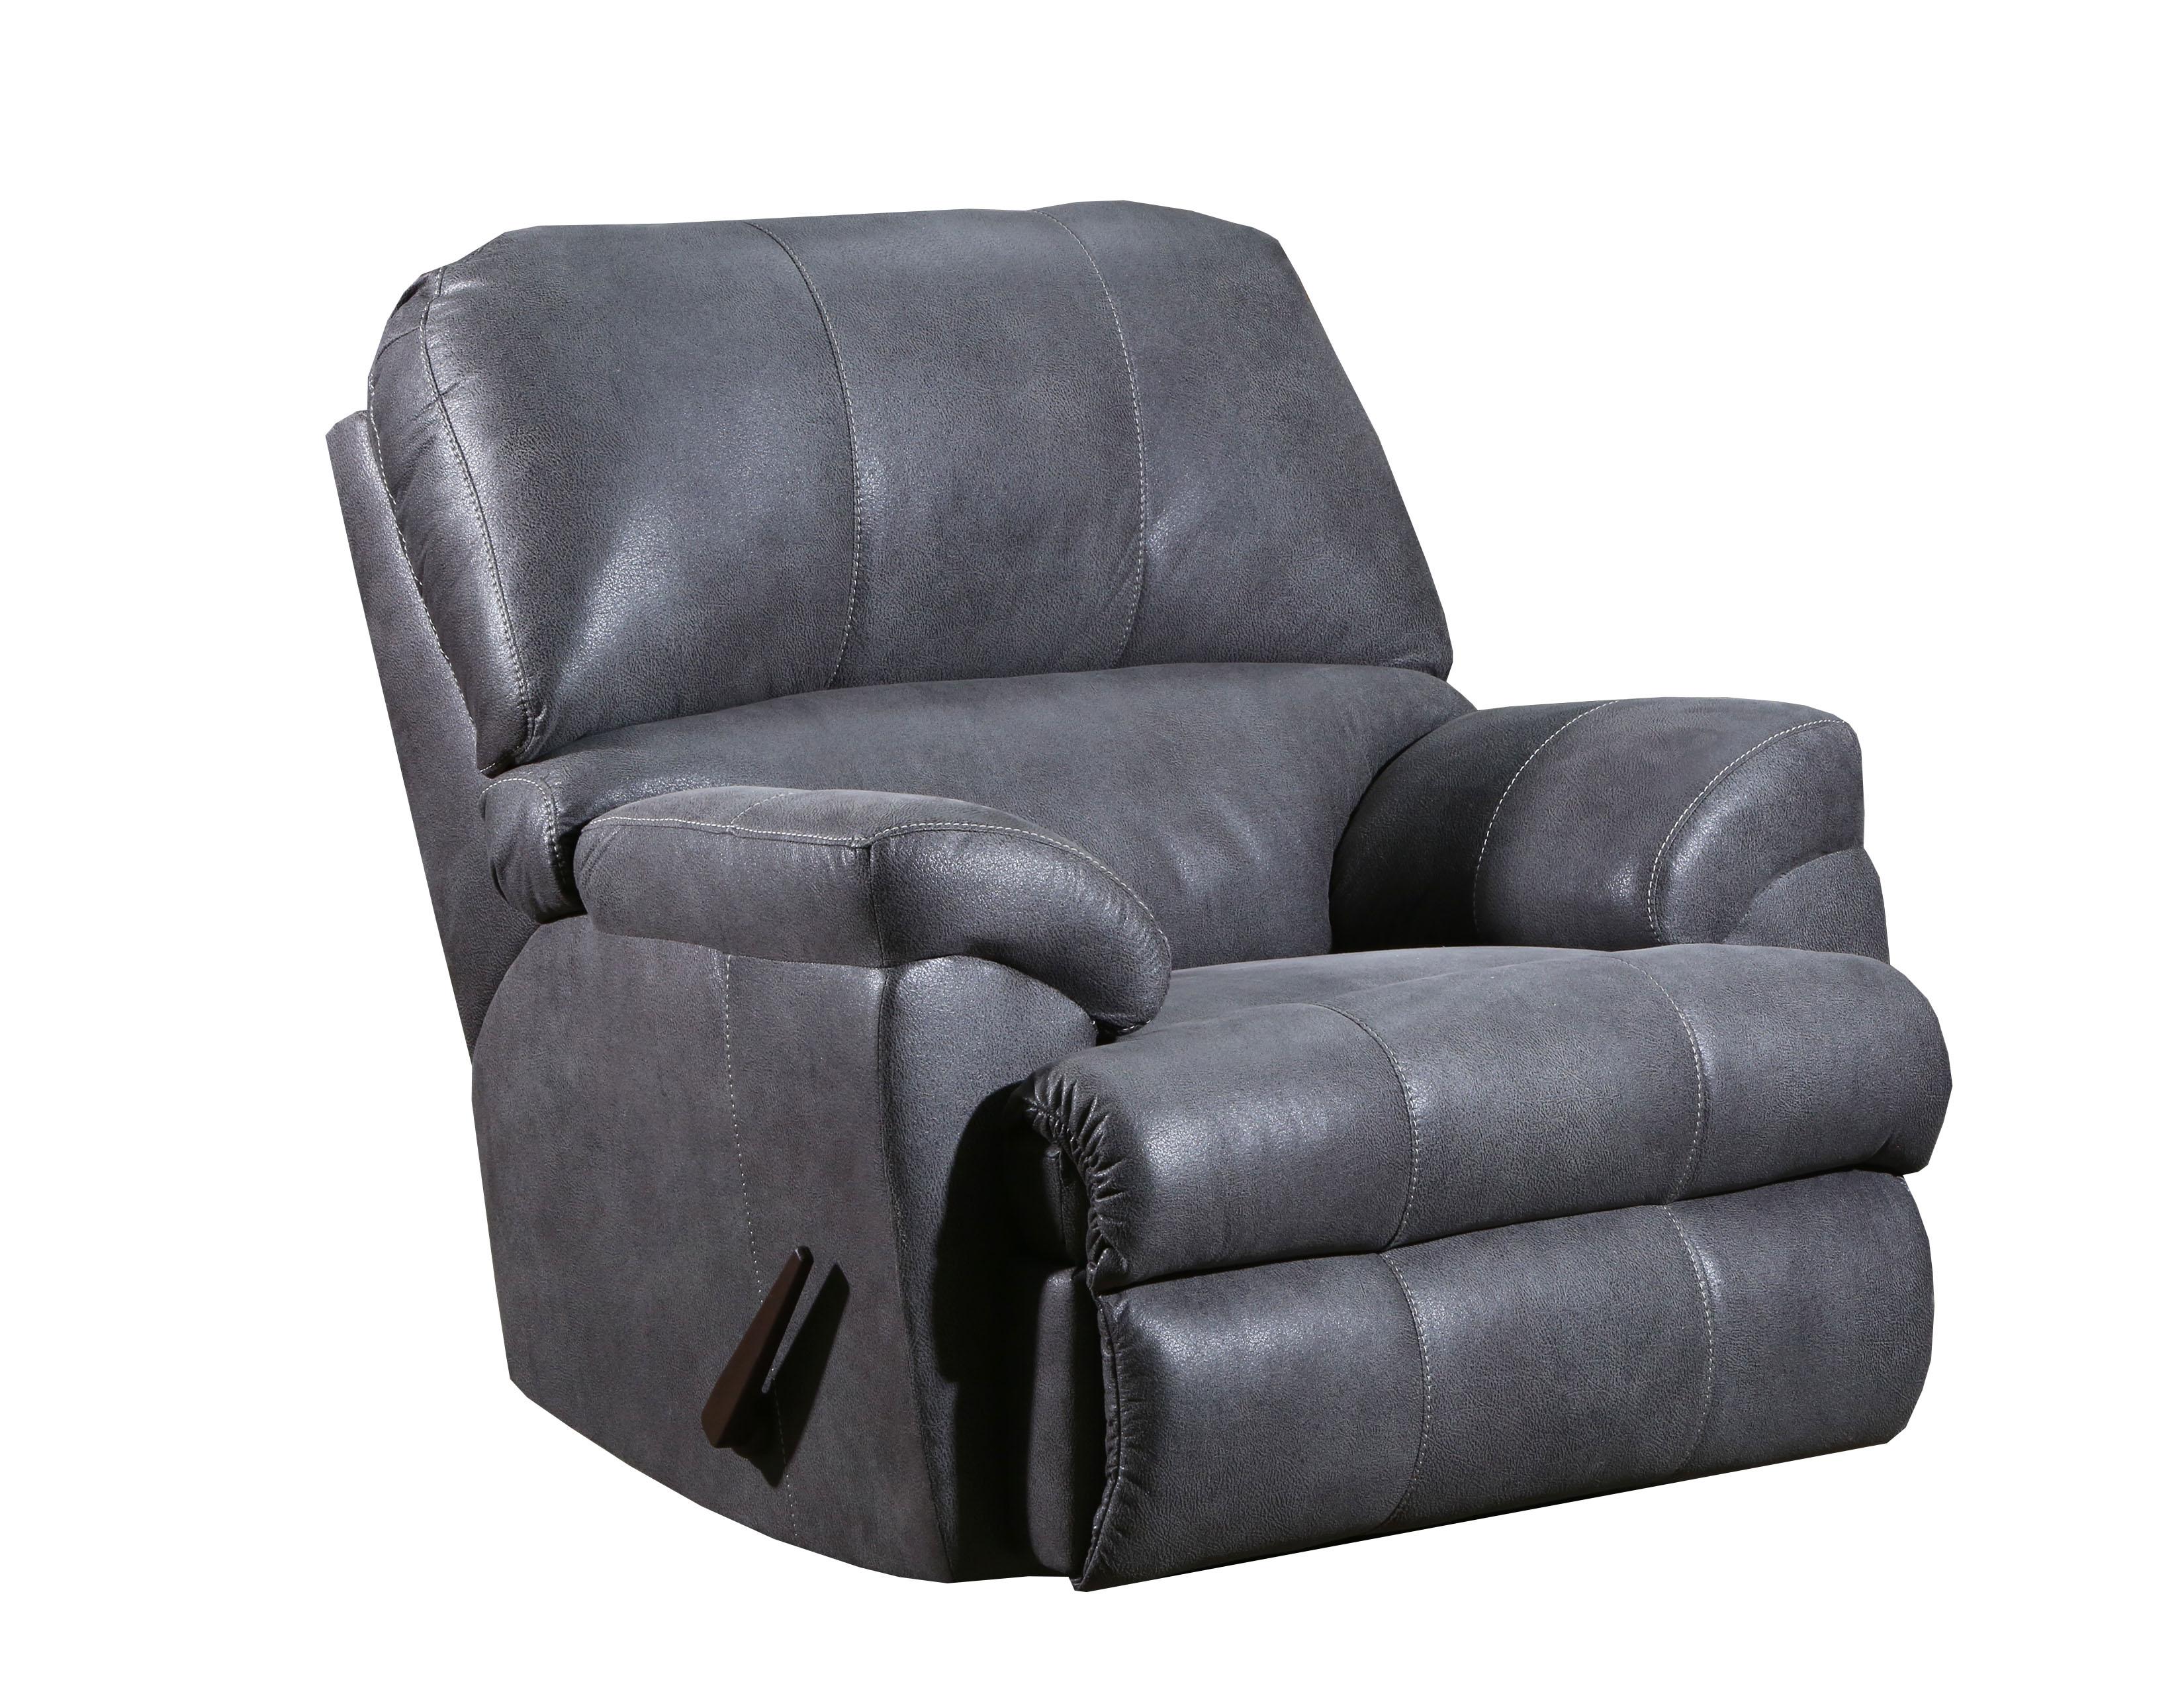 Expedition Grey Recliner